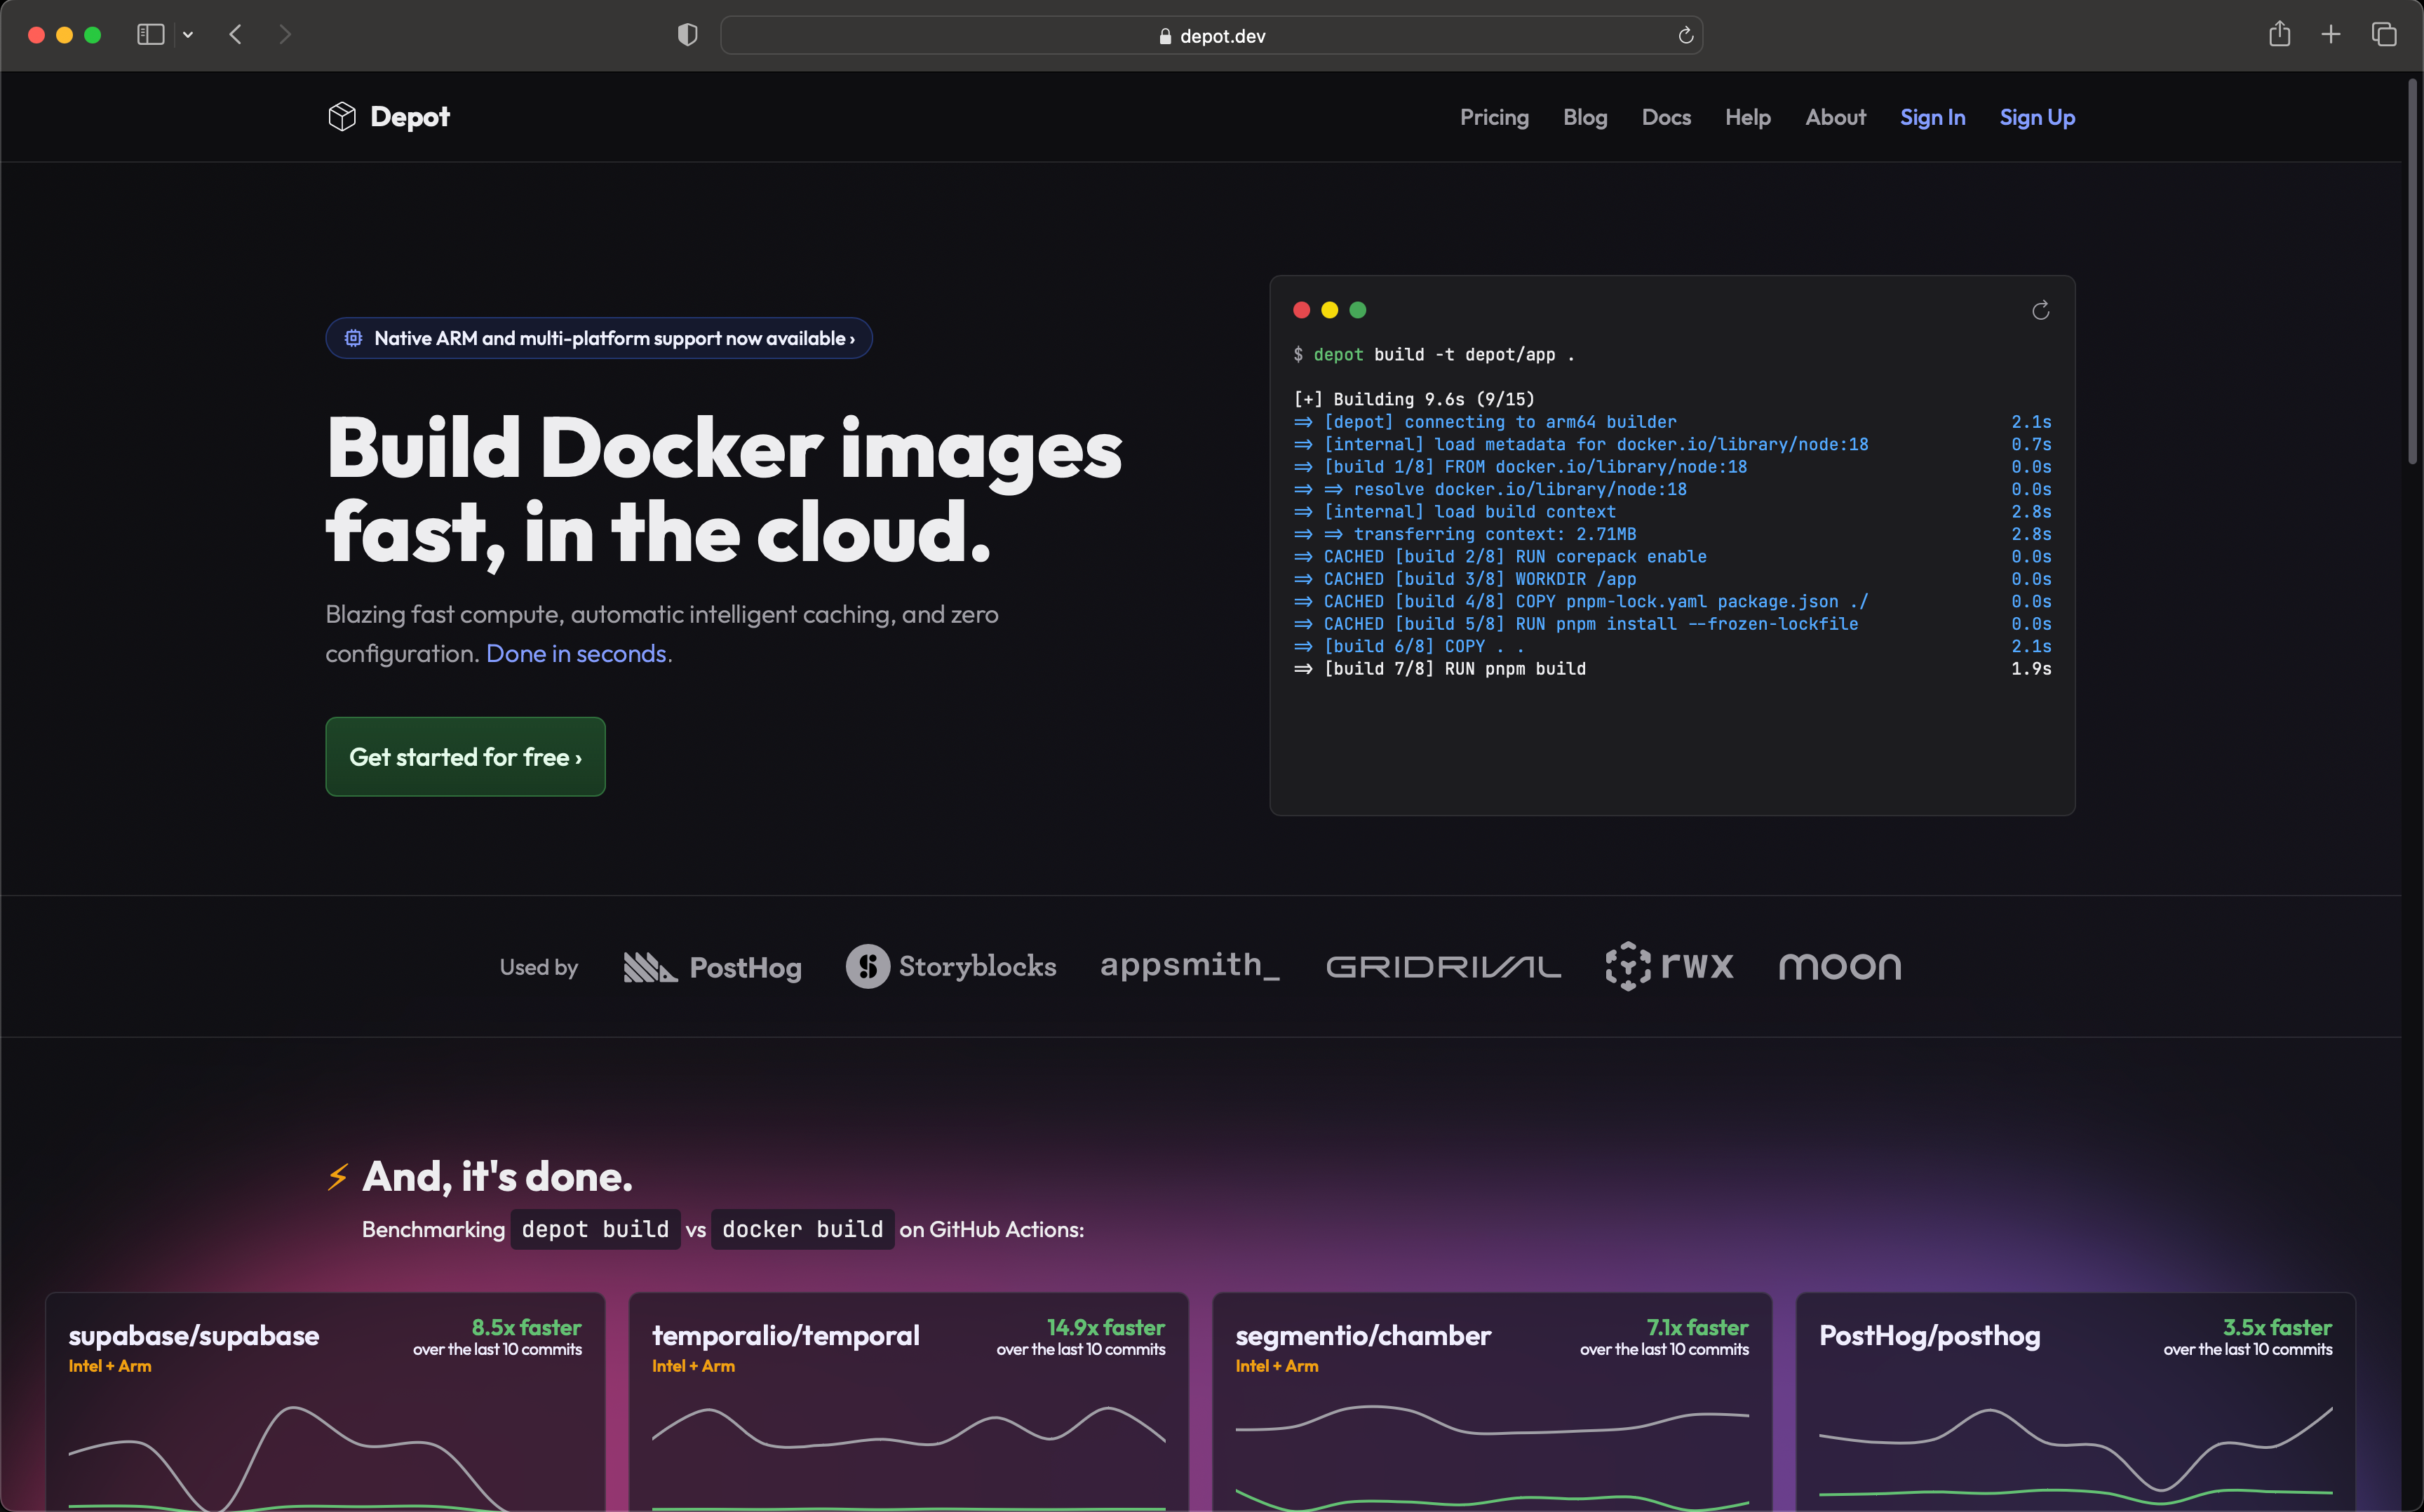 Landing page of Depot showing current users, benchmarks, and CLI demo